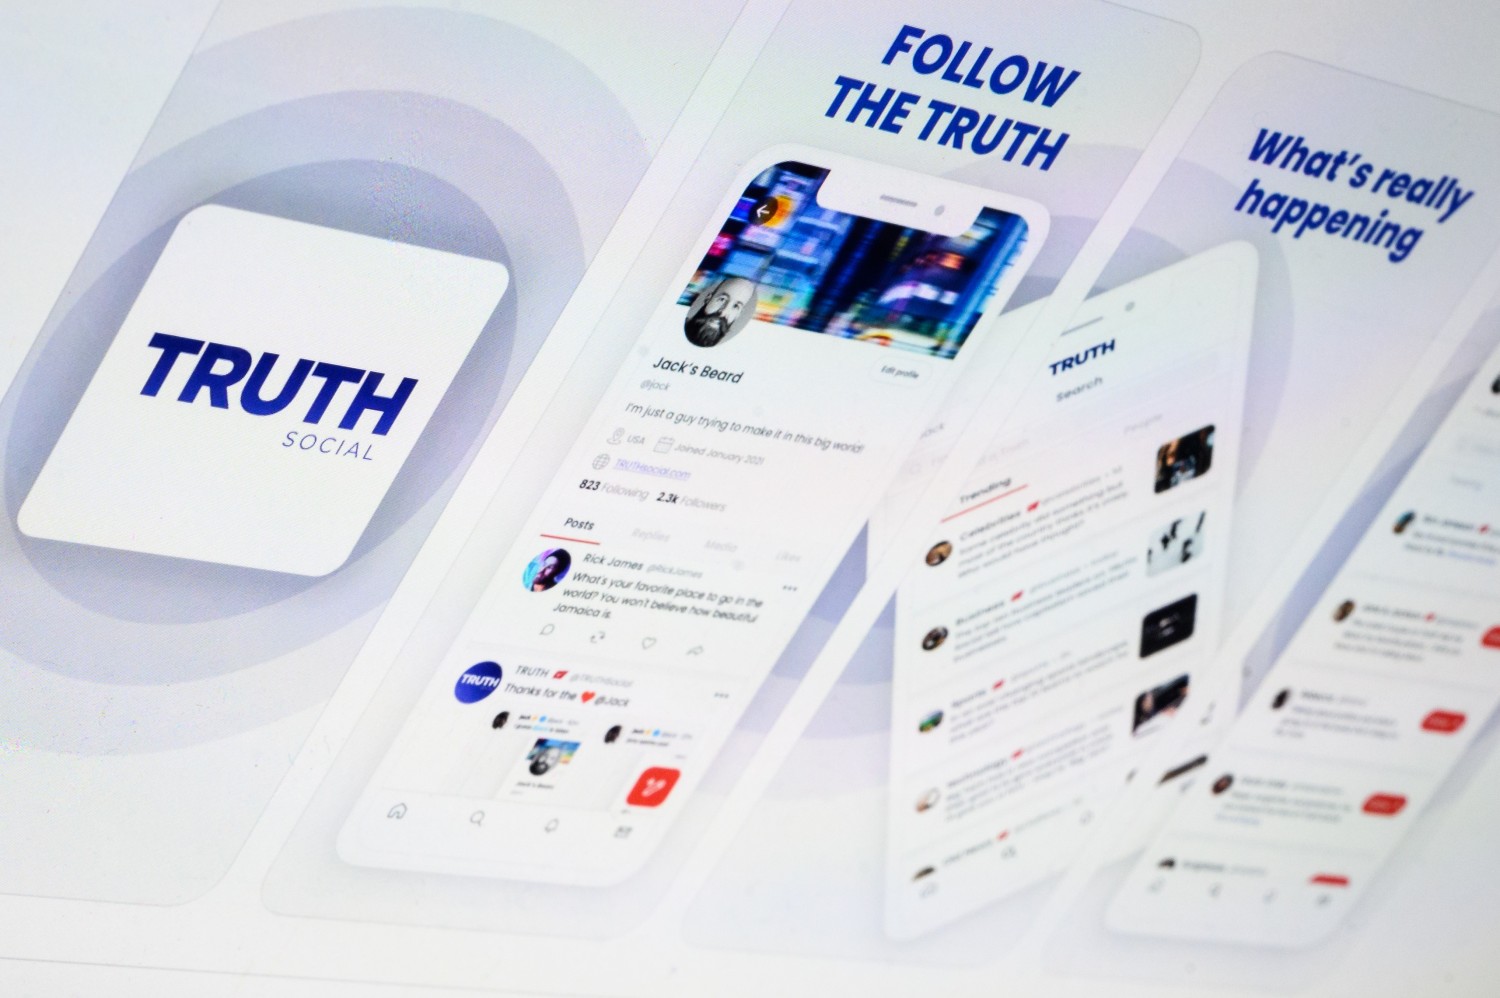 The holding screen for the Truth Social platform and app. (Leon Neal/Getty Images)